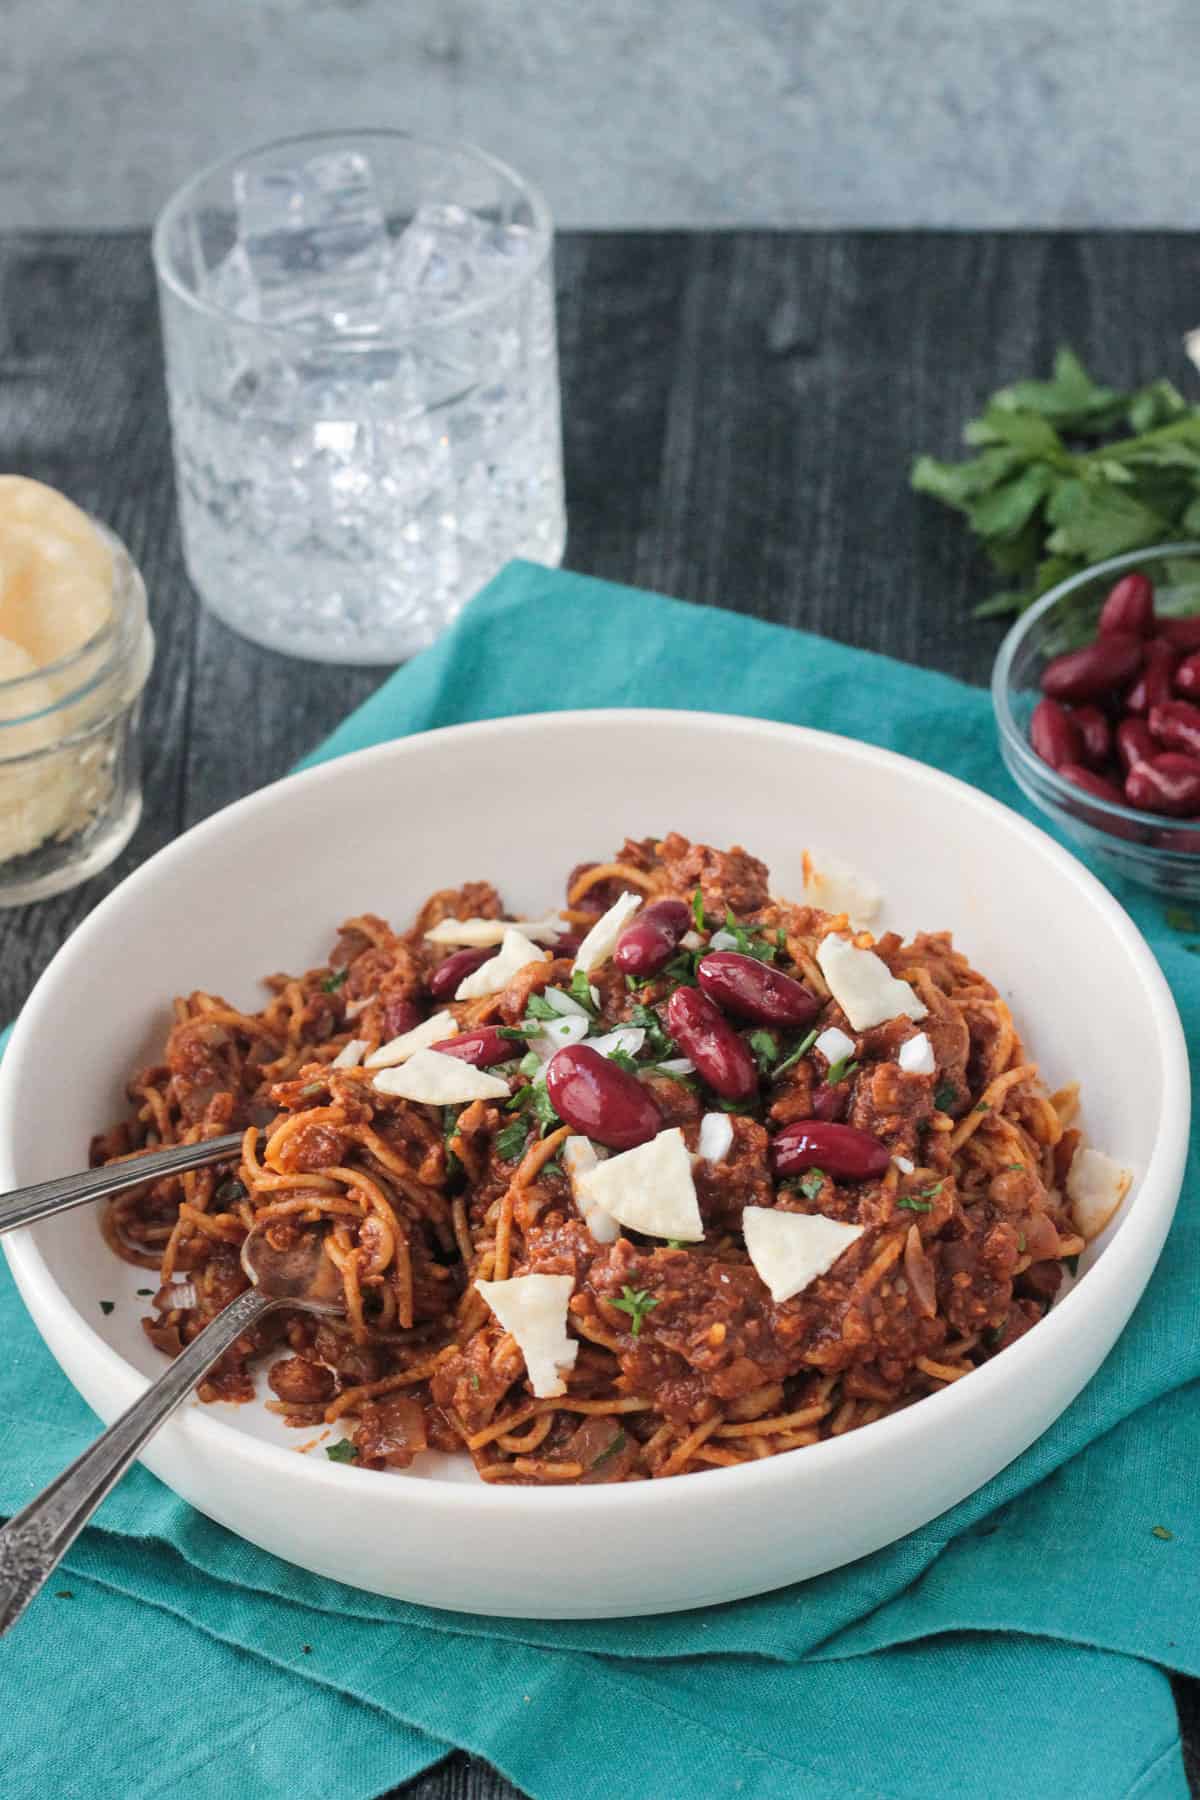 Crushed crackers and kidney beans on top of chili spaghetti in a white flat bowl.